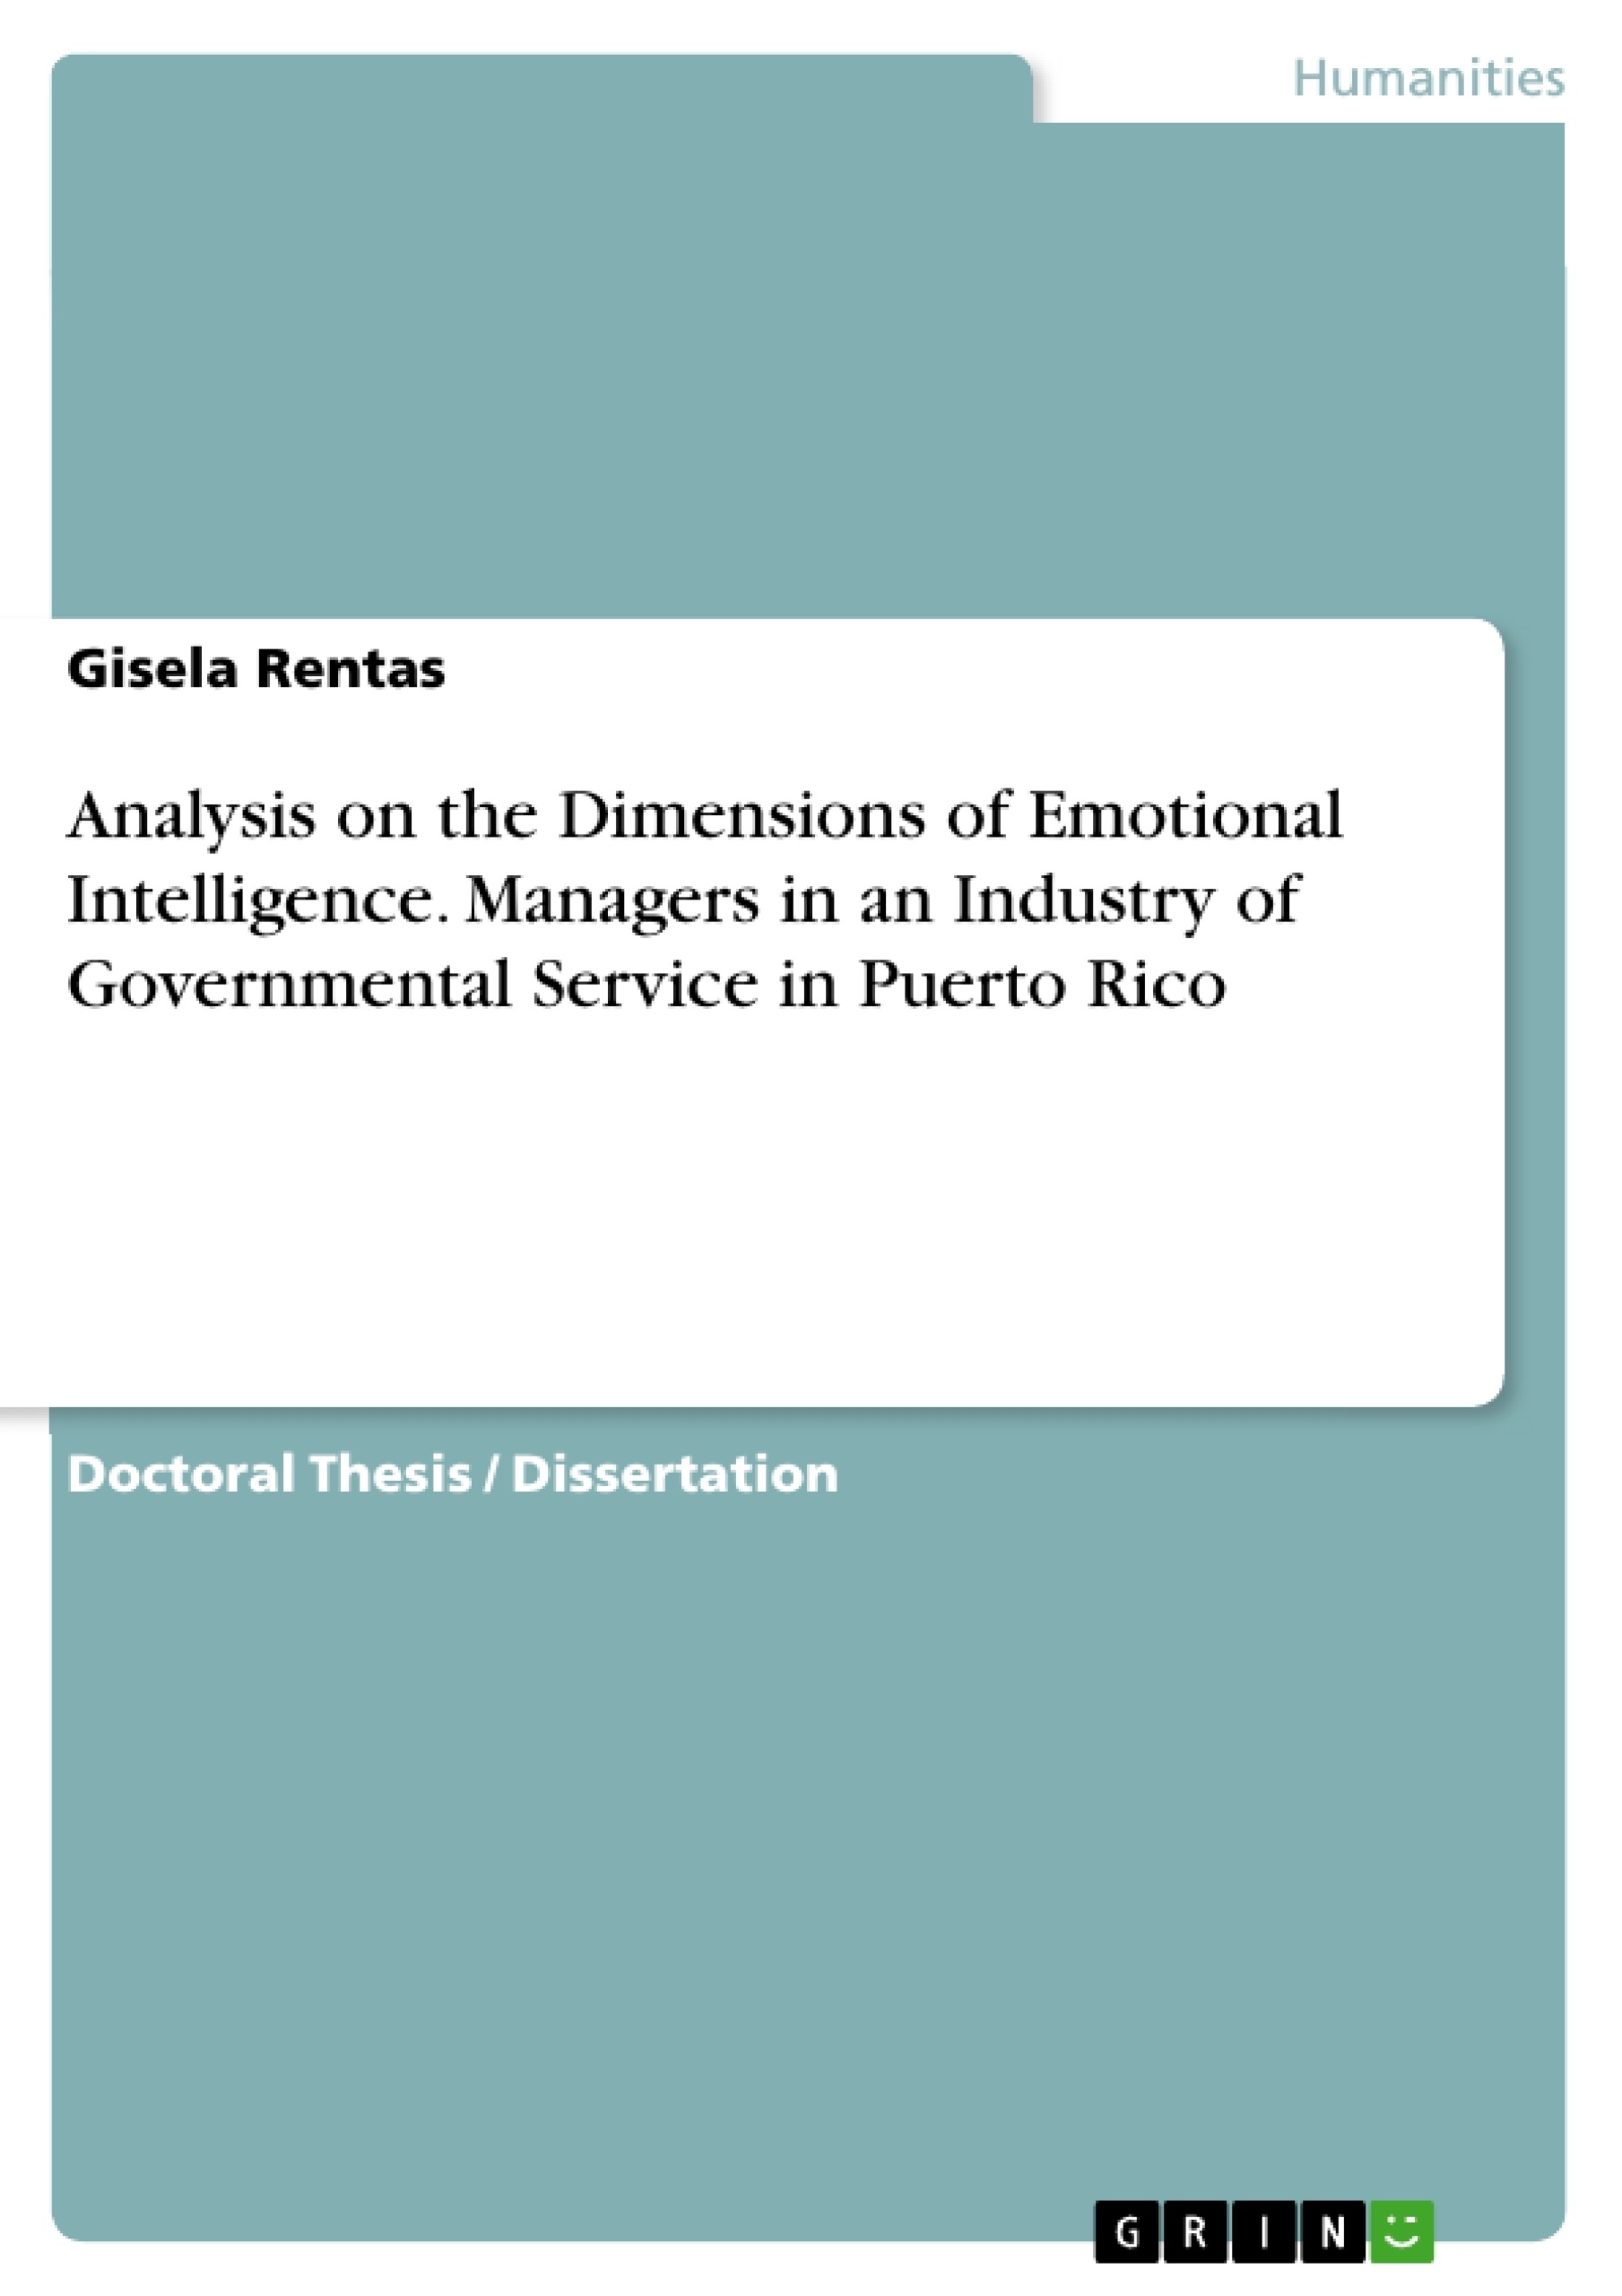 Title: Analysis on the Dimensions of Emotional Intelligence. Managers in an Industry of Governmental Service in Puerto Rico